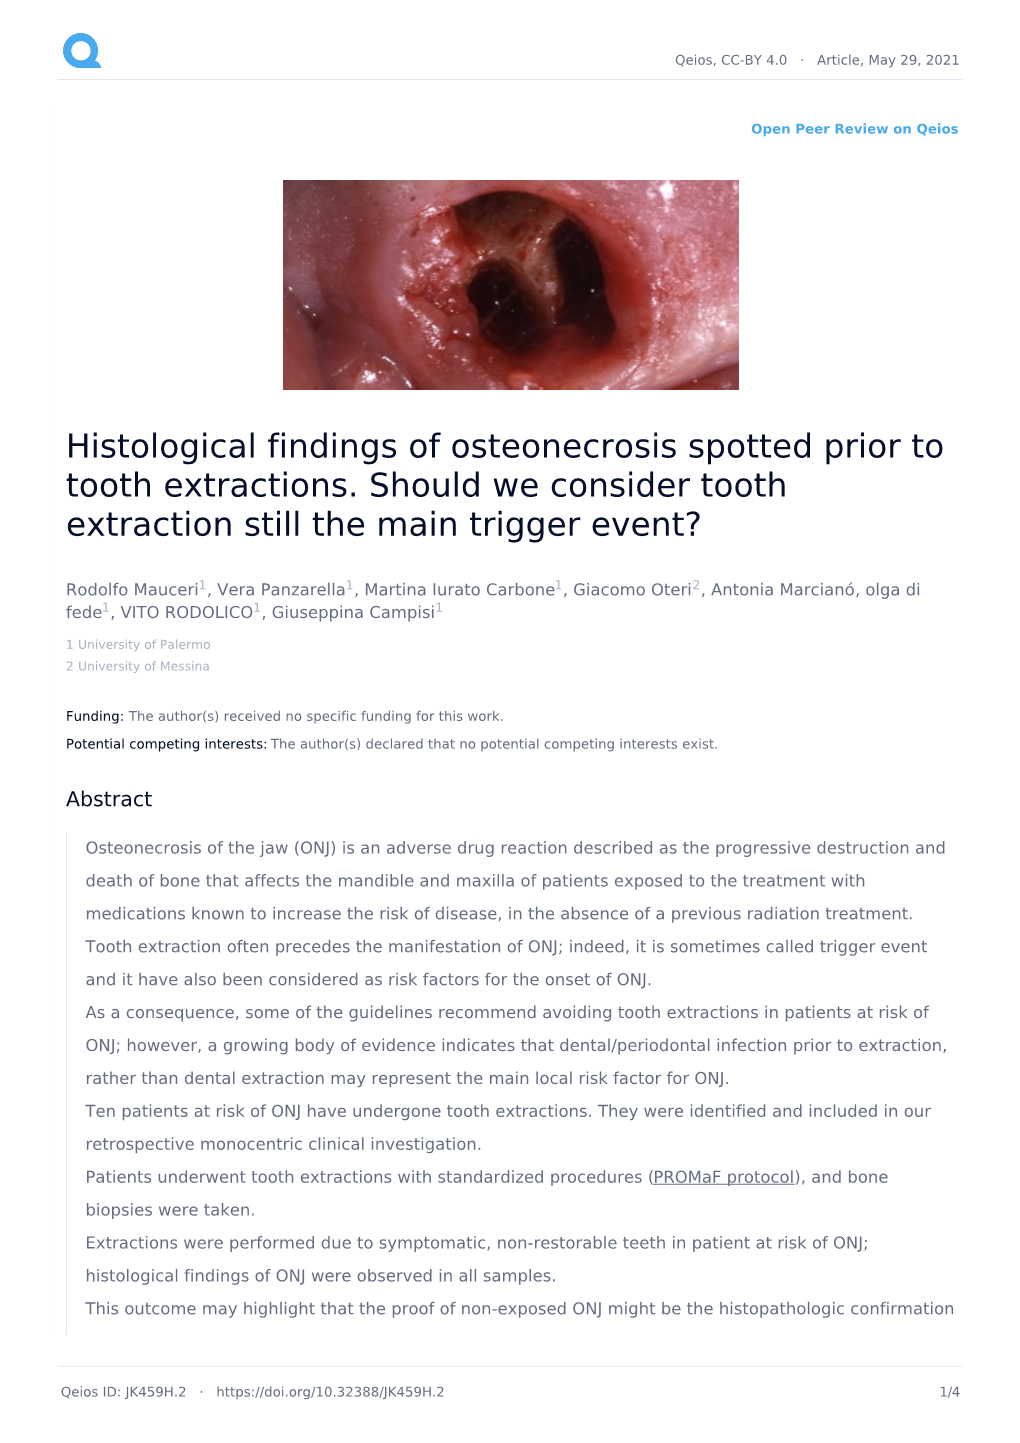 Histological Findings of Osteonecrosis Spotted Prior to Tooth Extractions